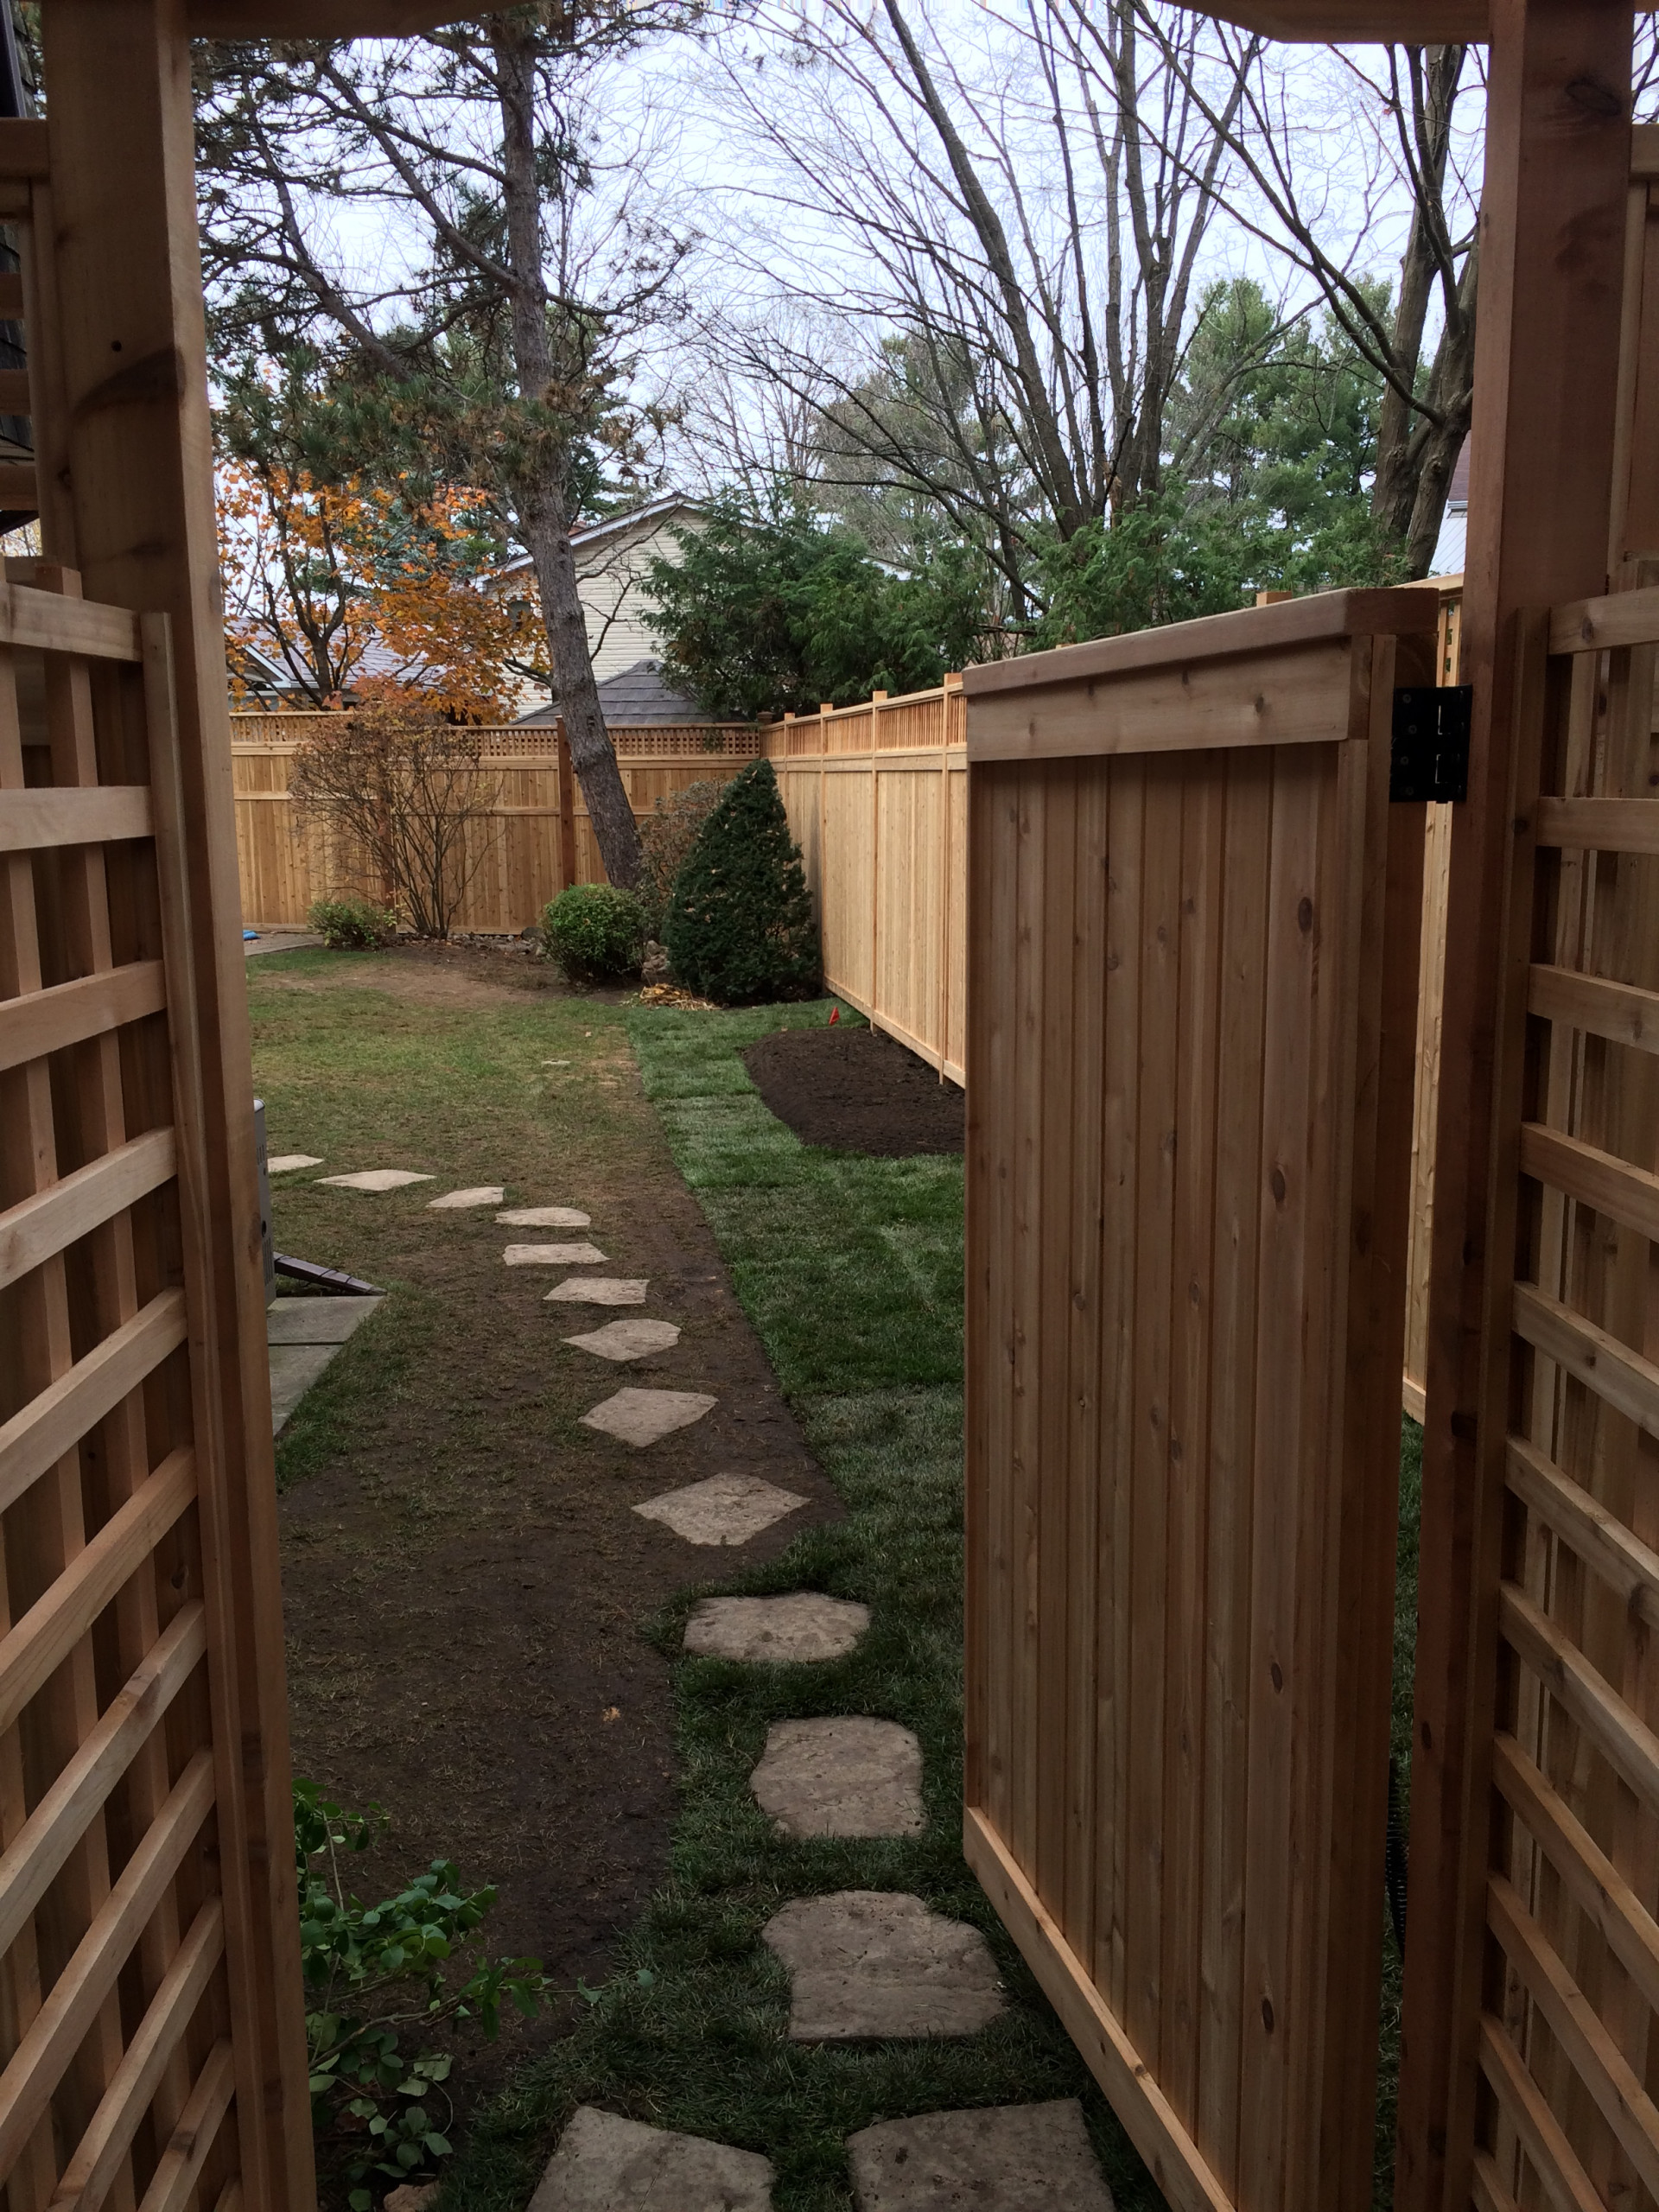 toungue & groove Cedar fence with 6 x 6 posts & 4 x 4 posts